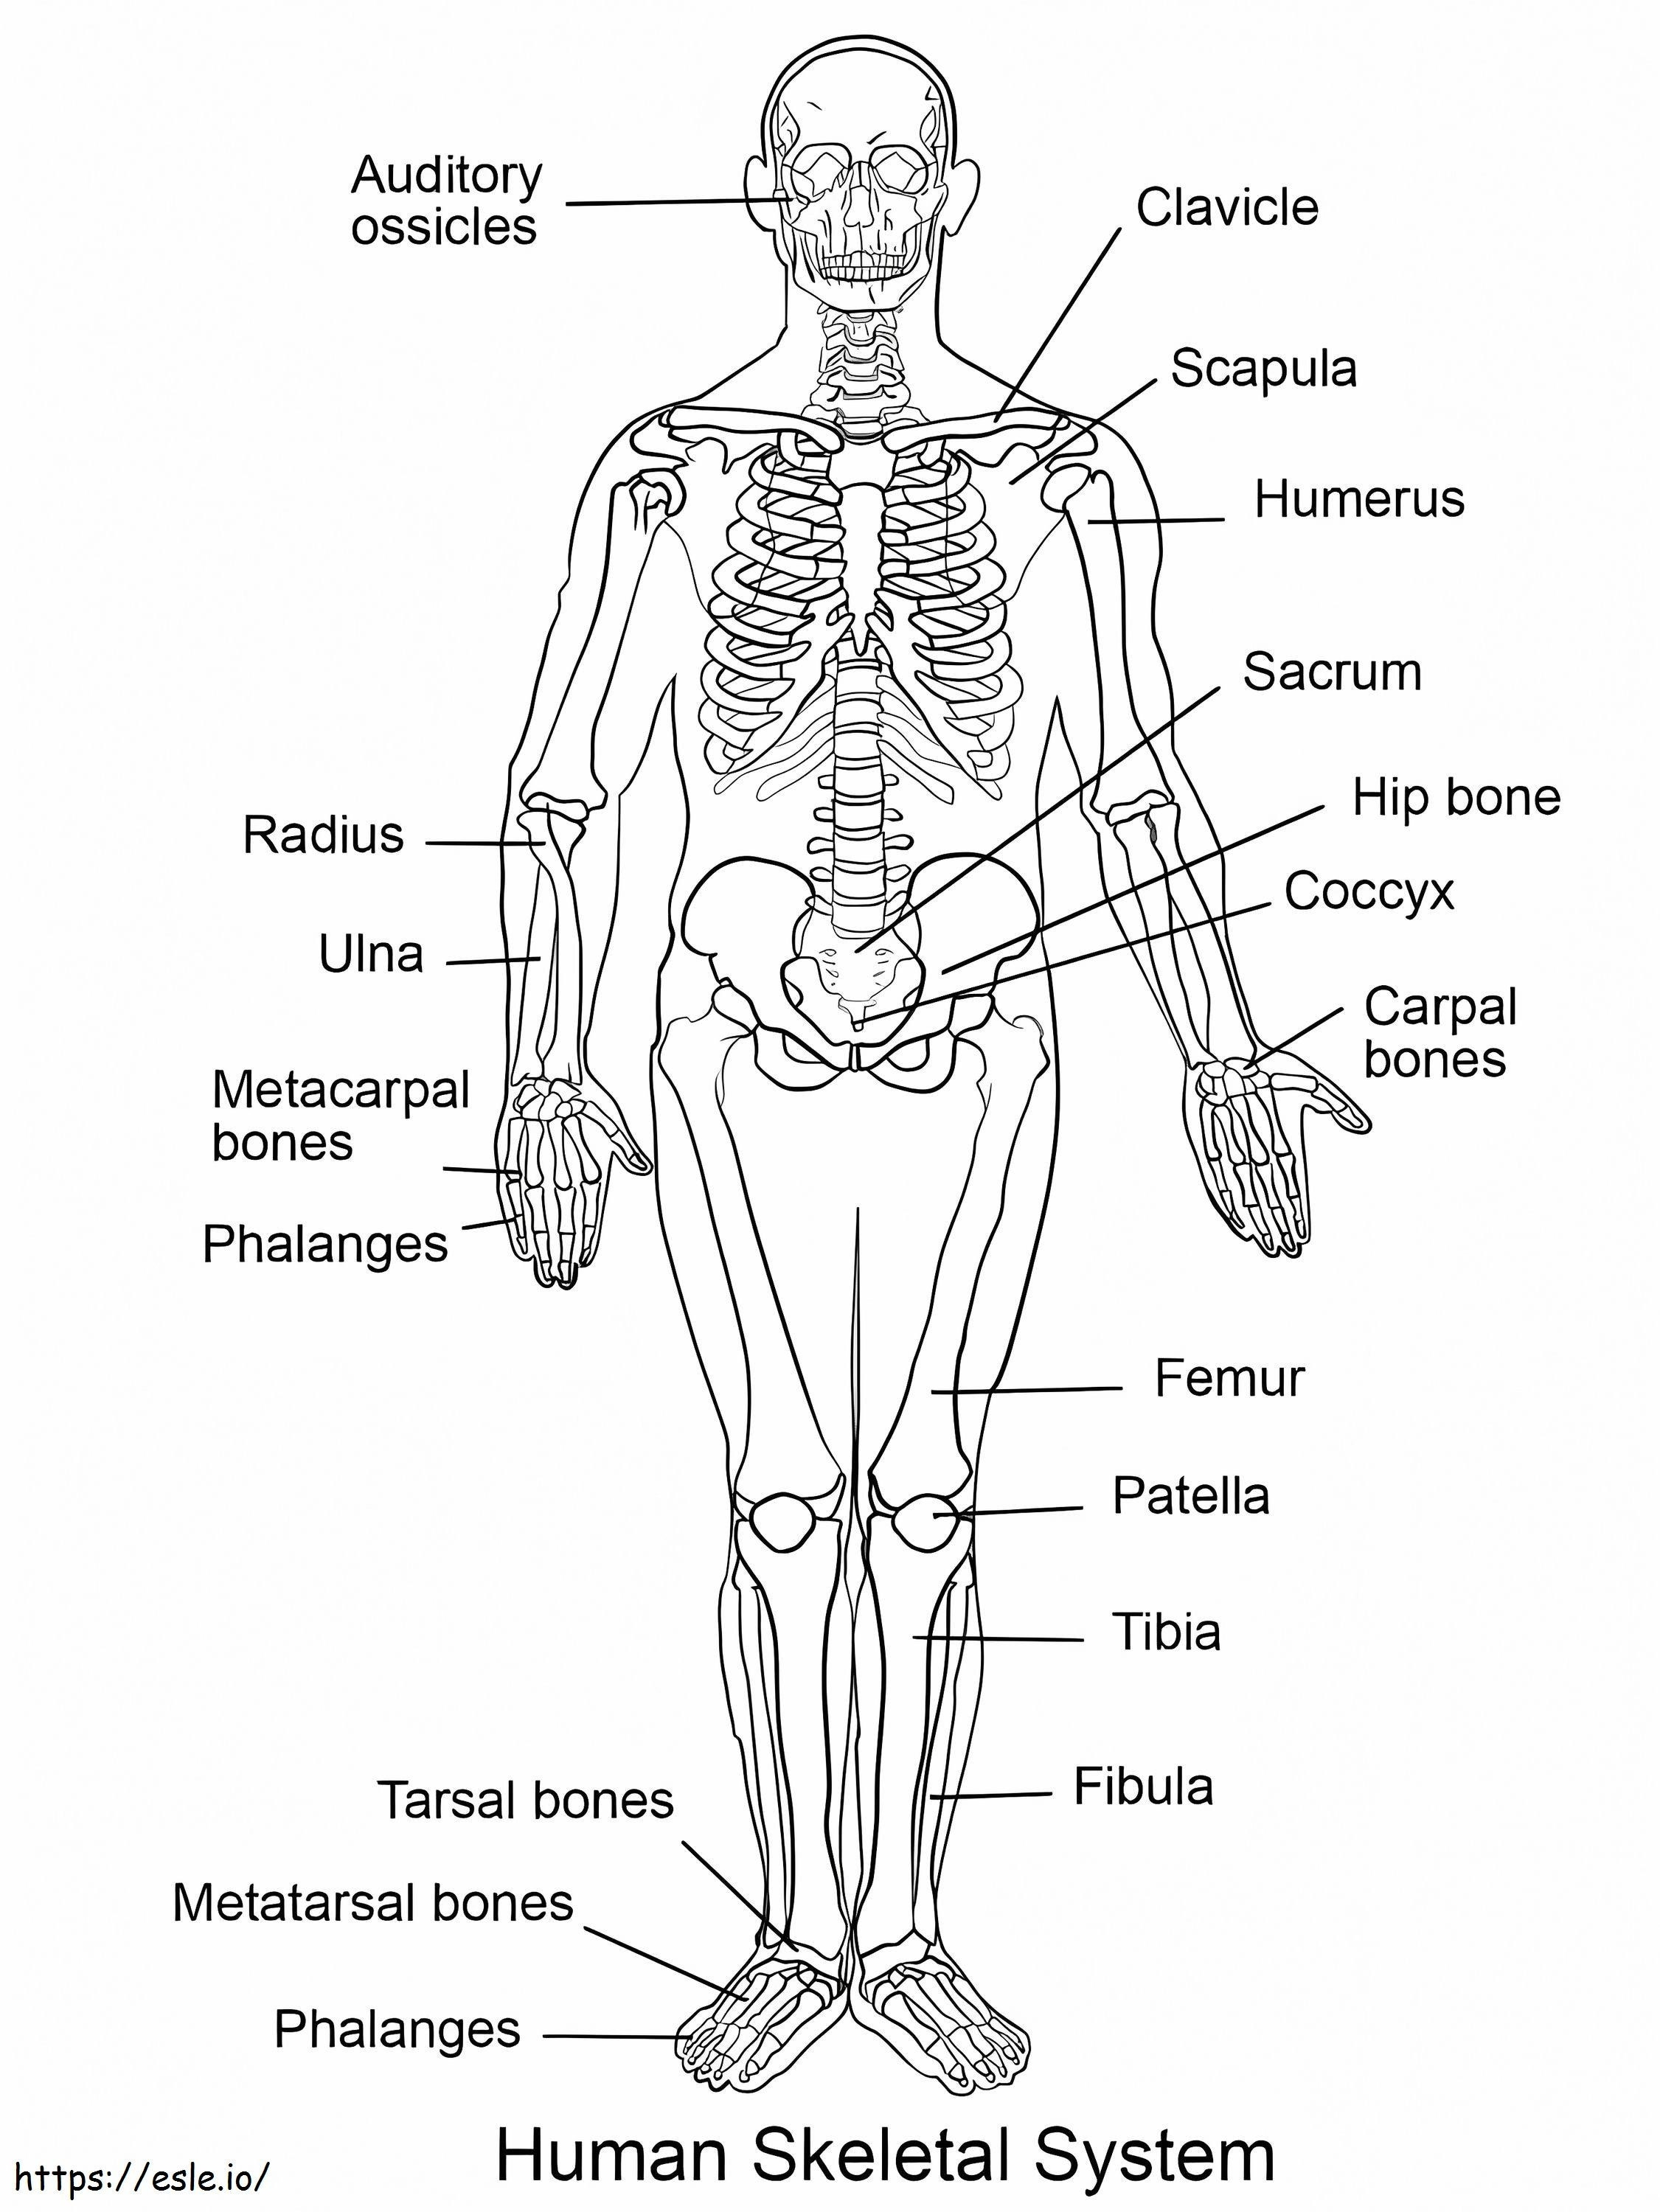 Human Skeletal System coloring page